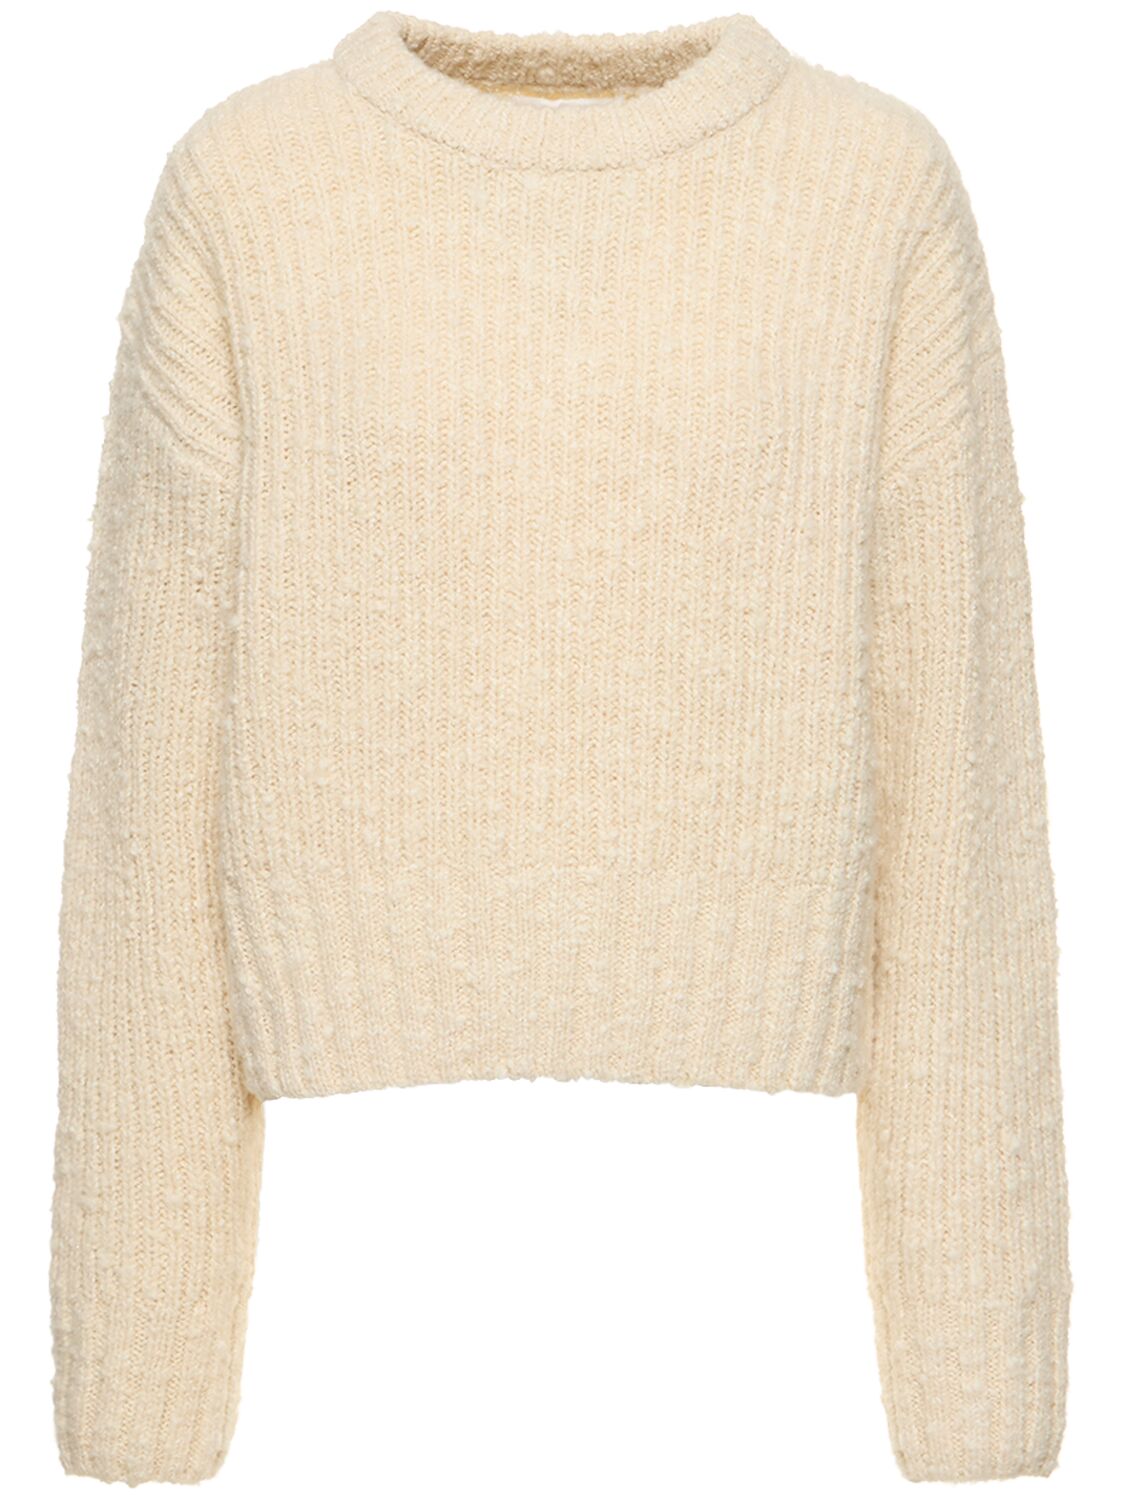 Ami Alexandre Mattiussi Brushed Textured Wool Sweater In Ivory